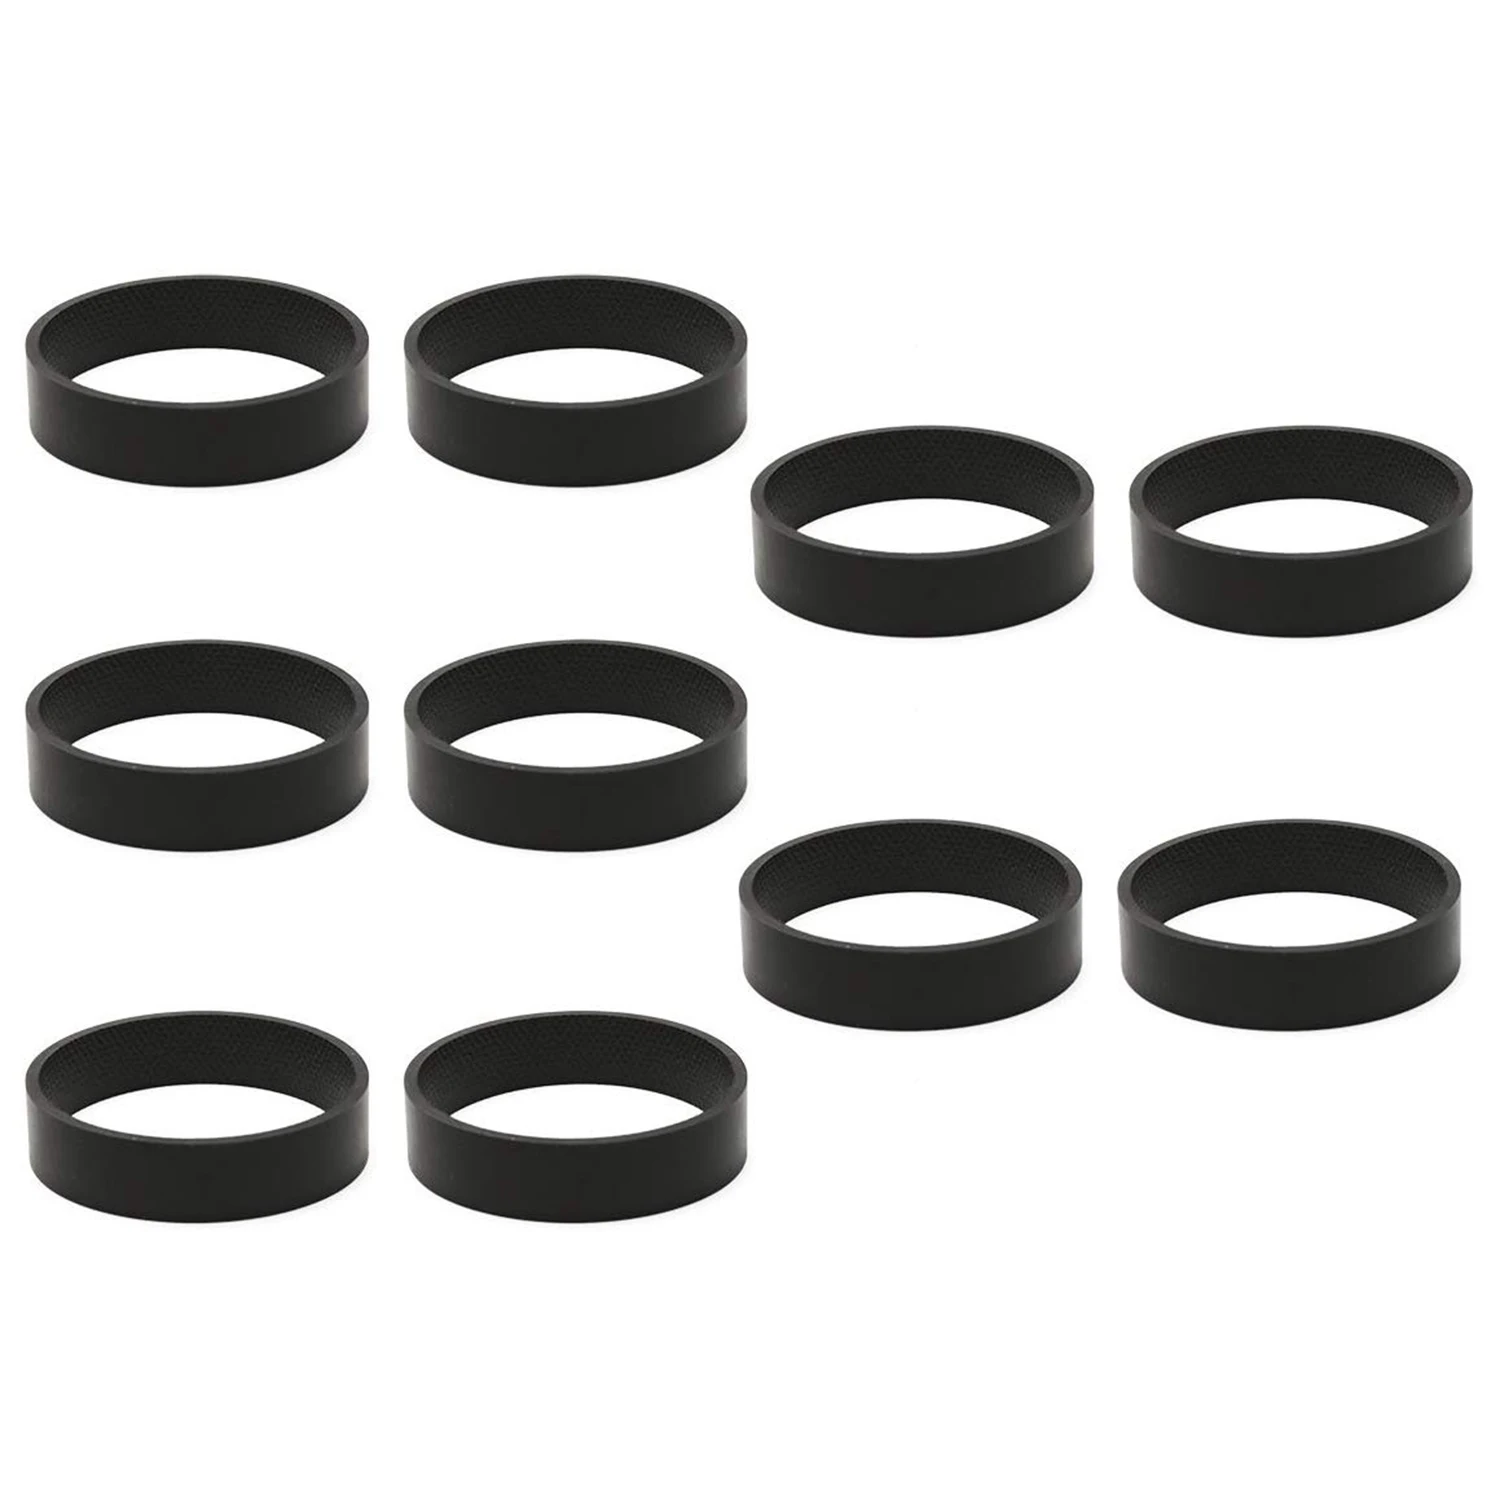 

10Pcs Vacuum Cleaner Belt for Kirby Series Fits All Generation Series Models